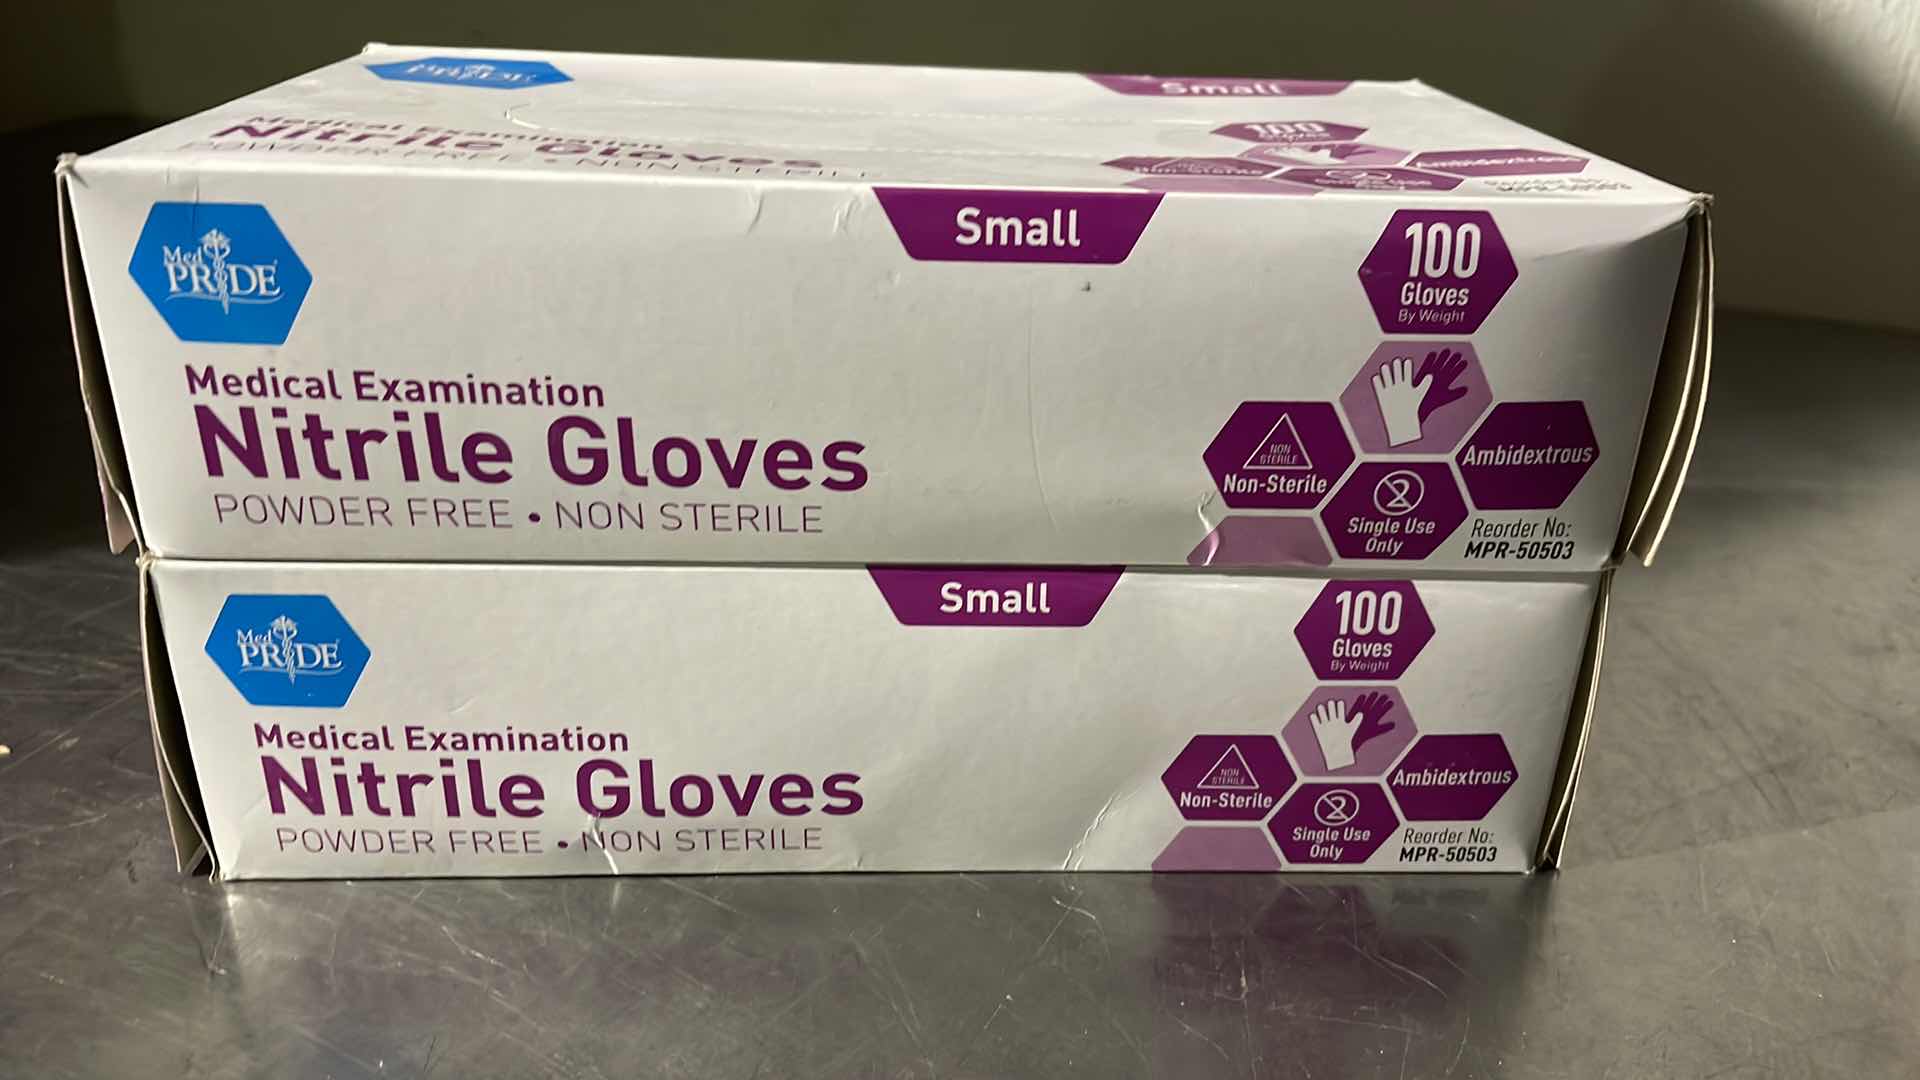 Photo 2 of MEDPRIDE POWDER-FREE NITRILE EXAM GLOVES SMALL, PACK OF 100 (2 BOXES)